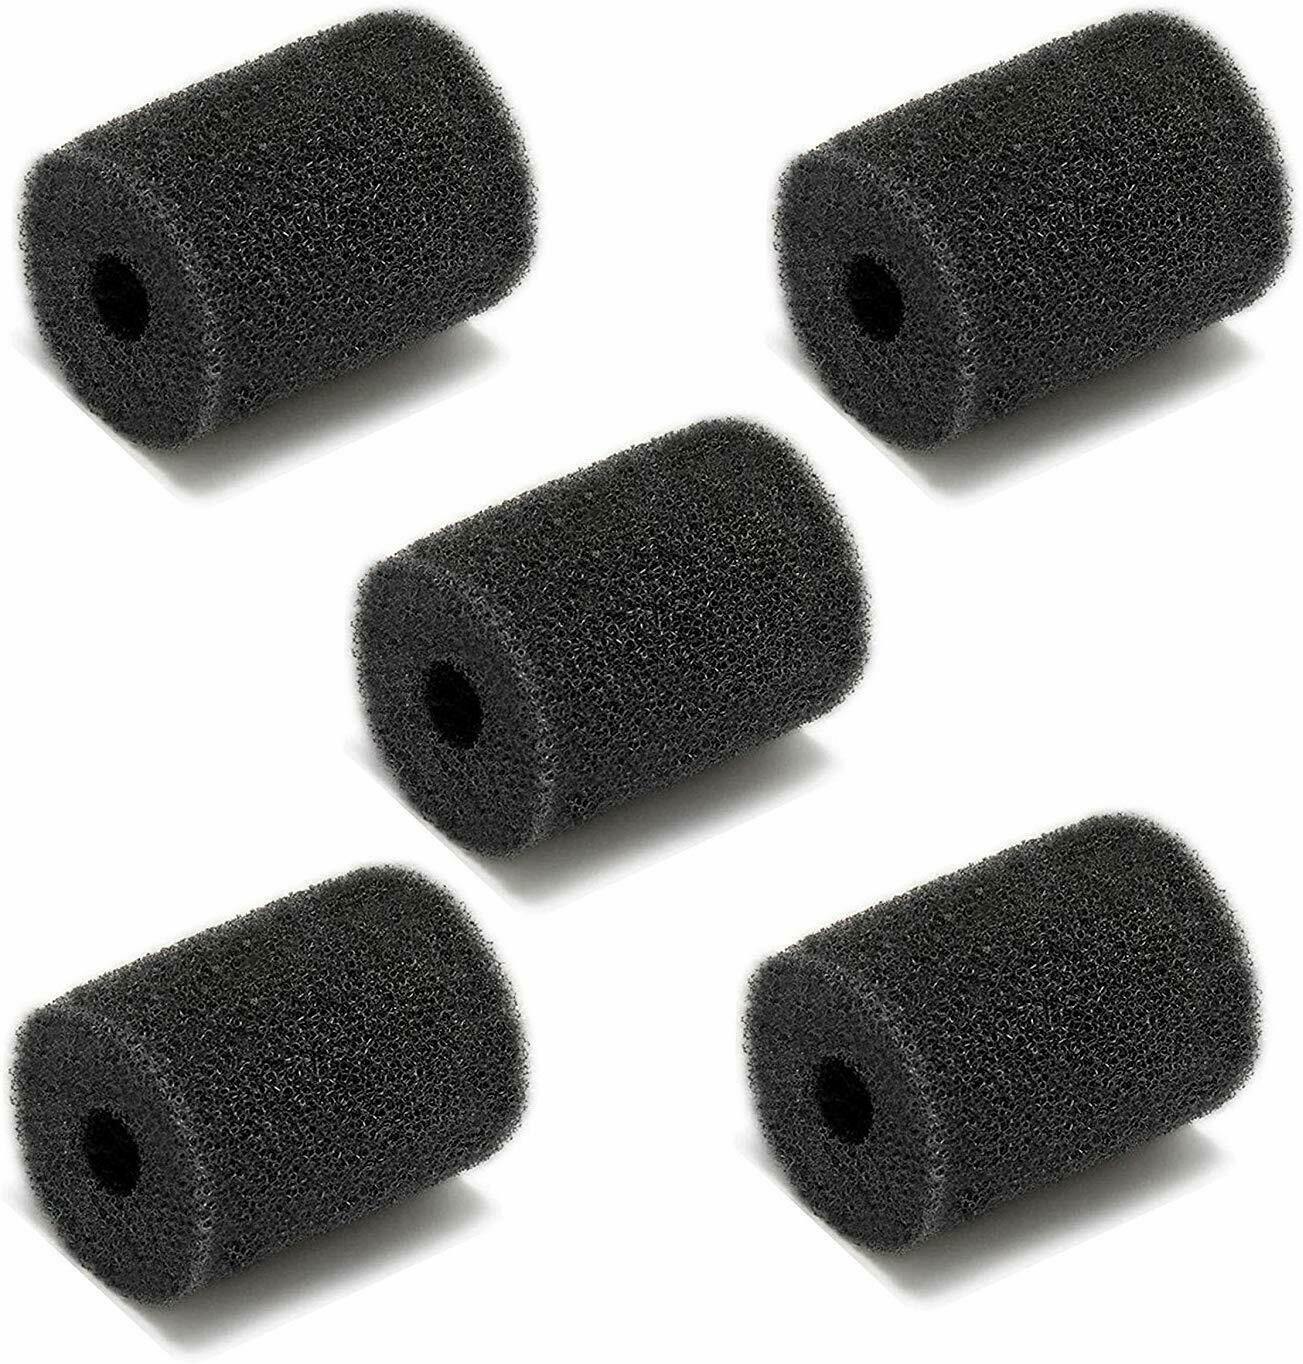 5X Hose Tail Scrubber for Polaris Pool Cleaner 9-100-3105 180 280 360 380 Sparesbarn